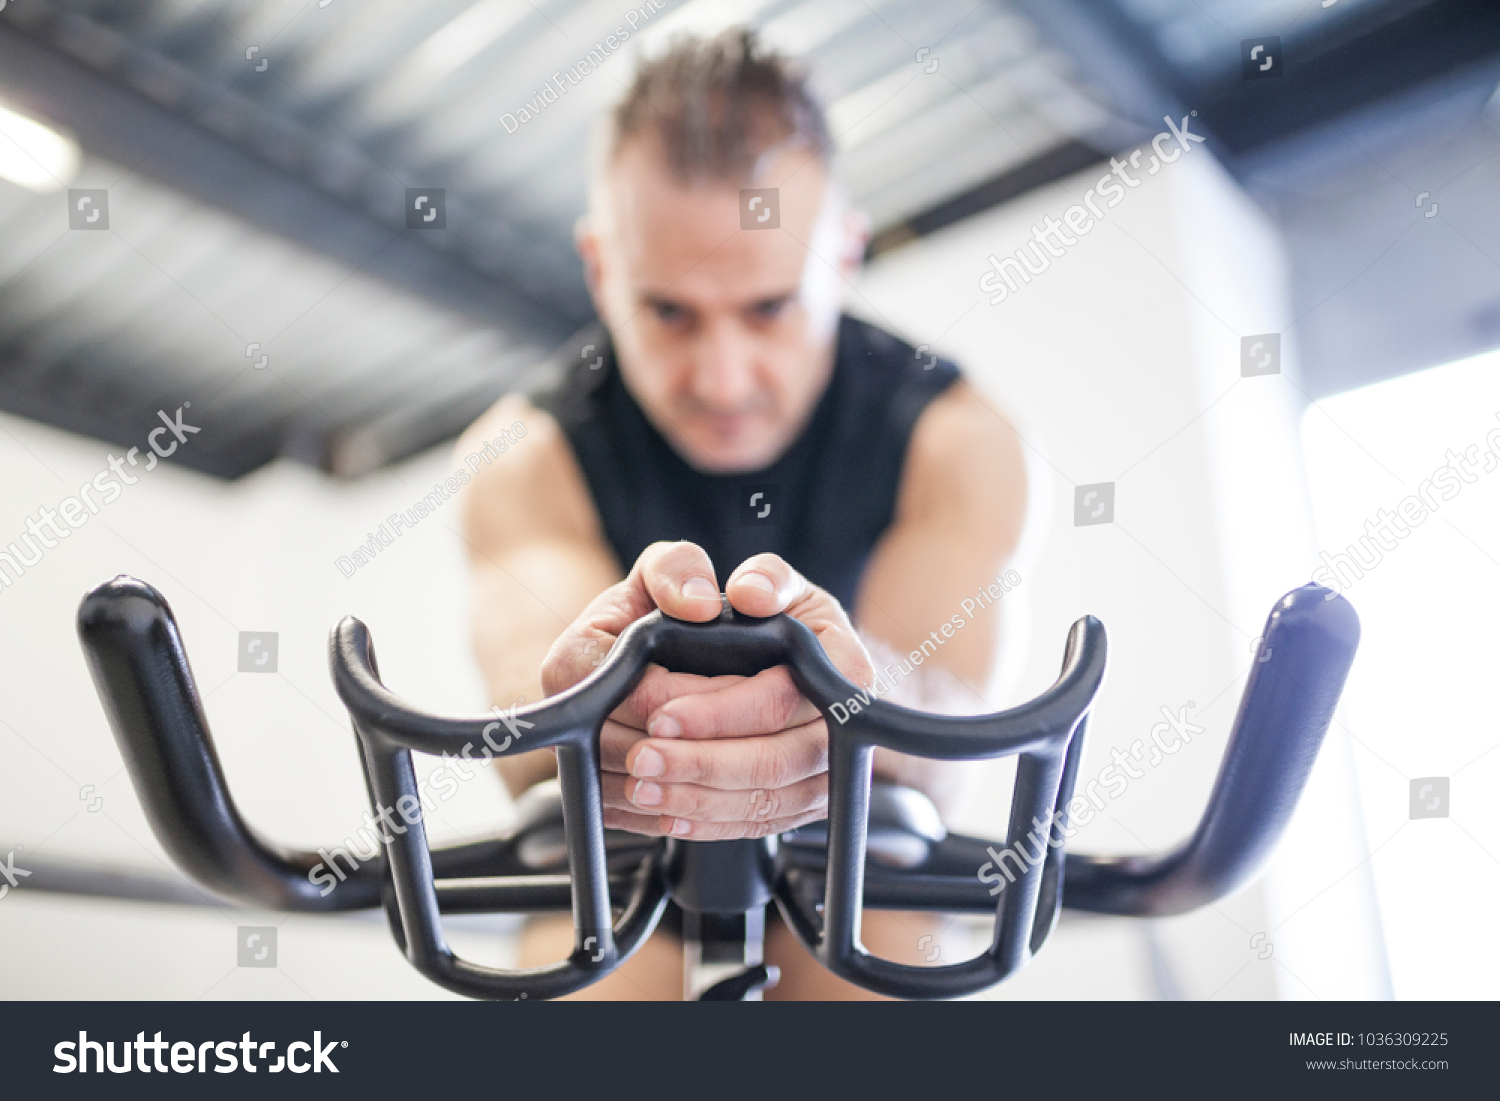 white-haired man in black training indoor cycling in front of window with light holding the handlebar in the middle #1036309225